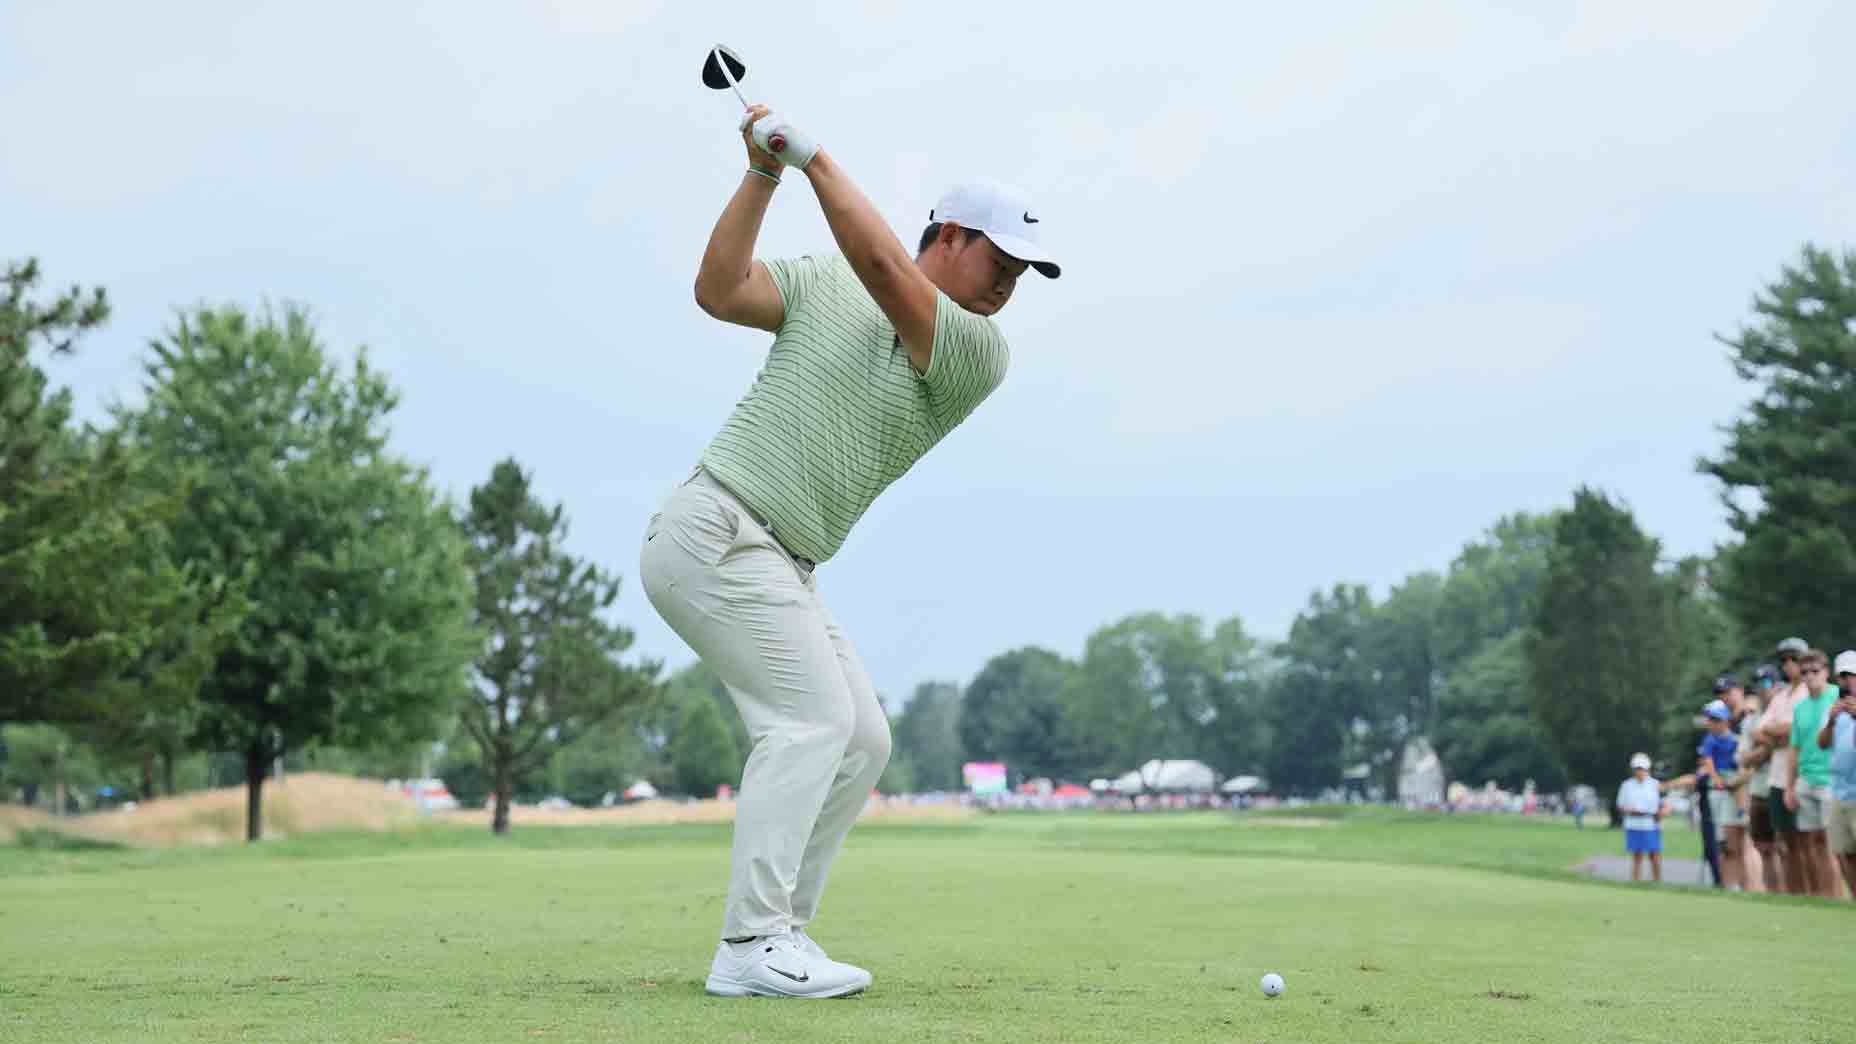 Tom Kim Holds One-Stroke Lead at Travelers Championship After Historic Third Round, Shoots 65; Scottie Scheffler and Akshay Bhatia Join Him in Final Grouping